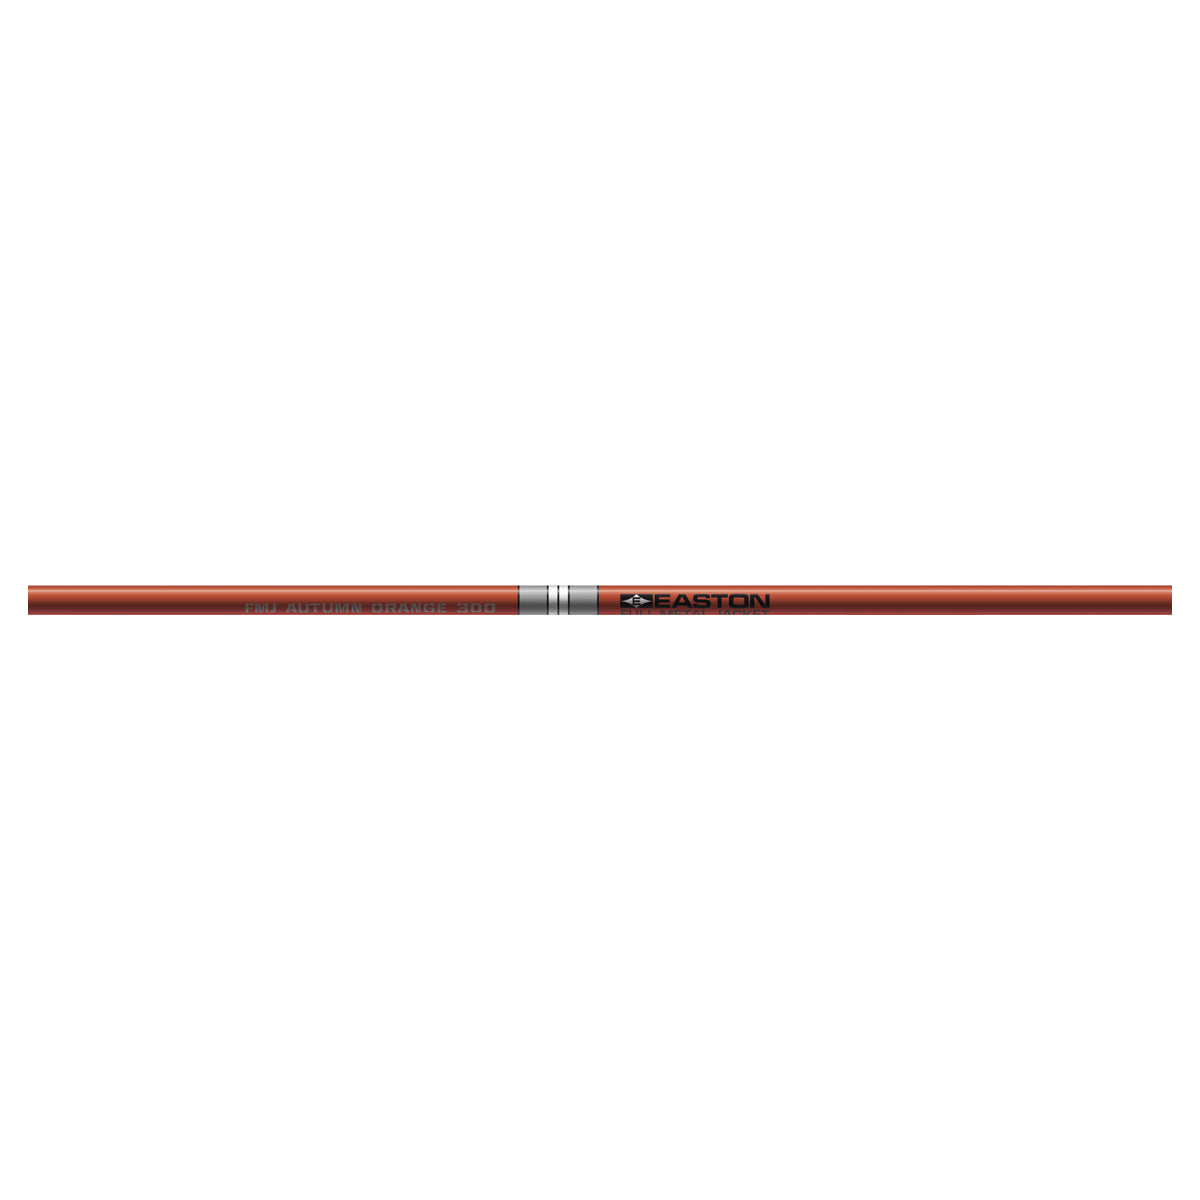 Easton FMJ 5MM Autumn Orange Limited Edition Arrow Shafts - 12 Count in  by GOHUNT | Easton - GOHUNT Shop